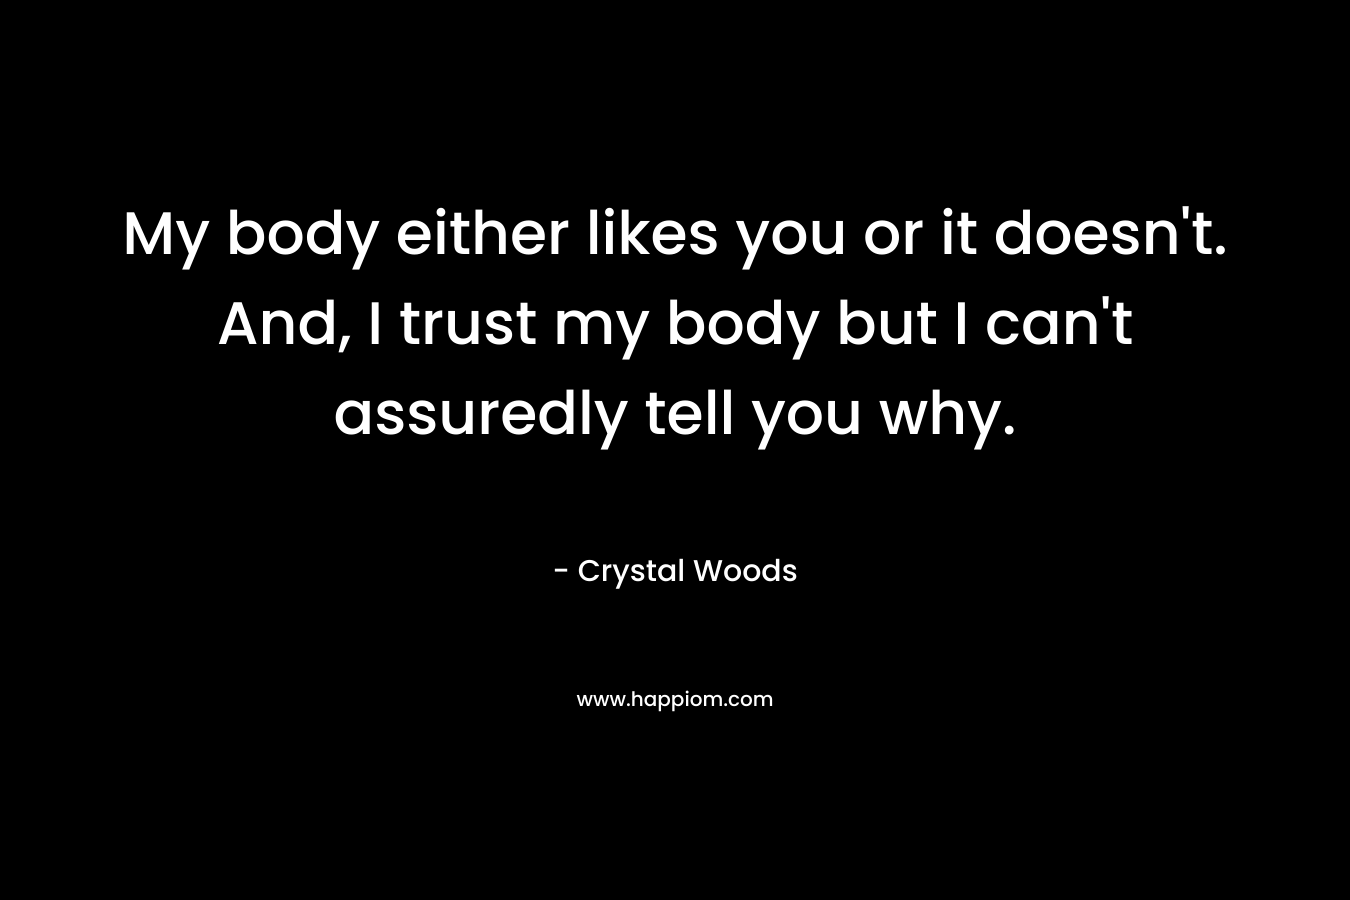 My body either likes you or it doesn't. And, I trust my body but I can't assuredly tell you why.